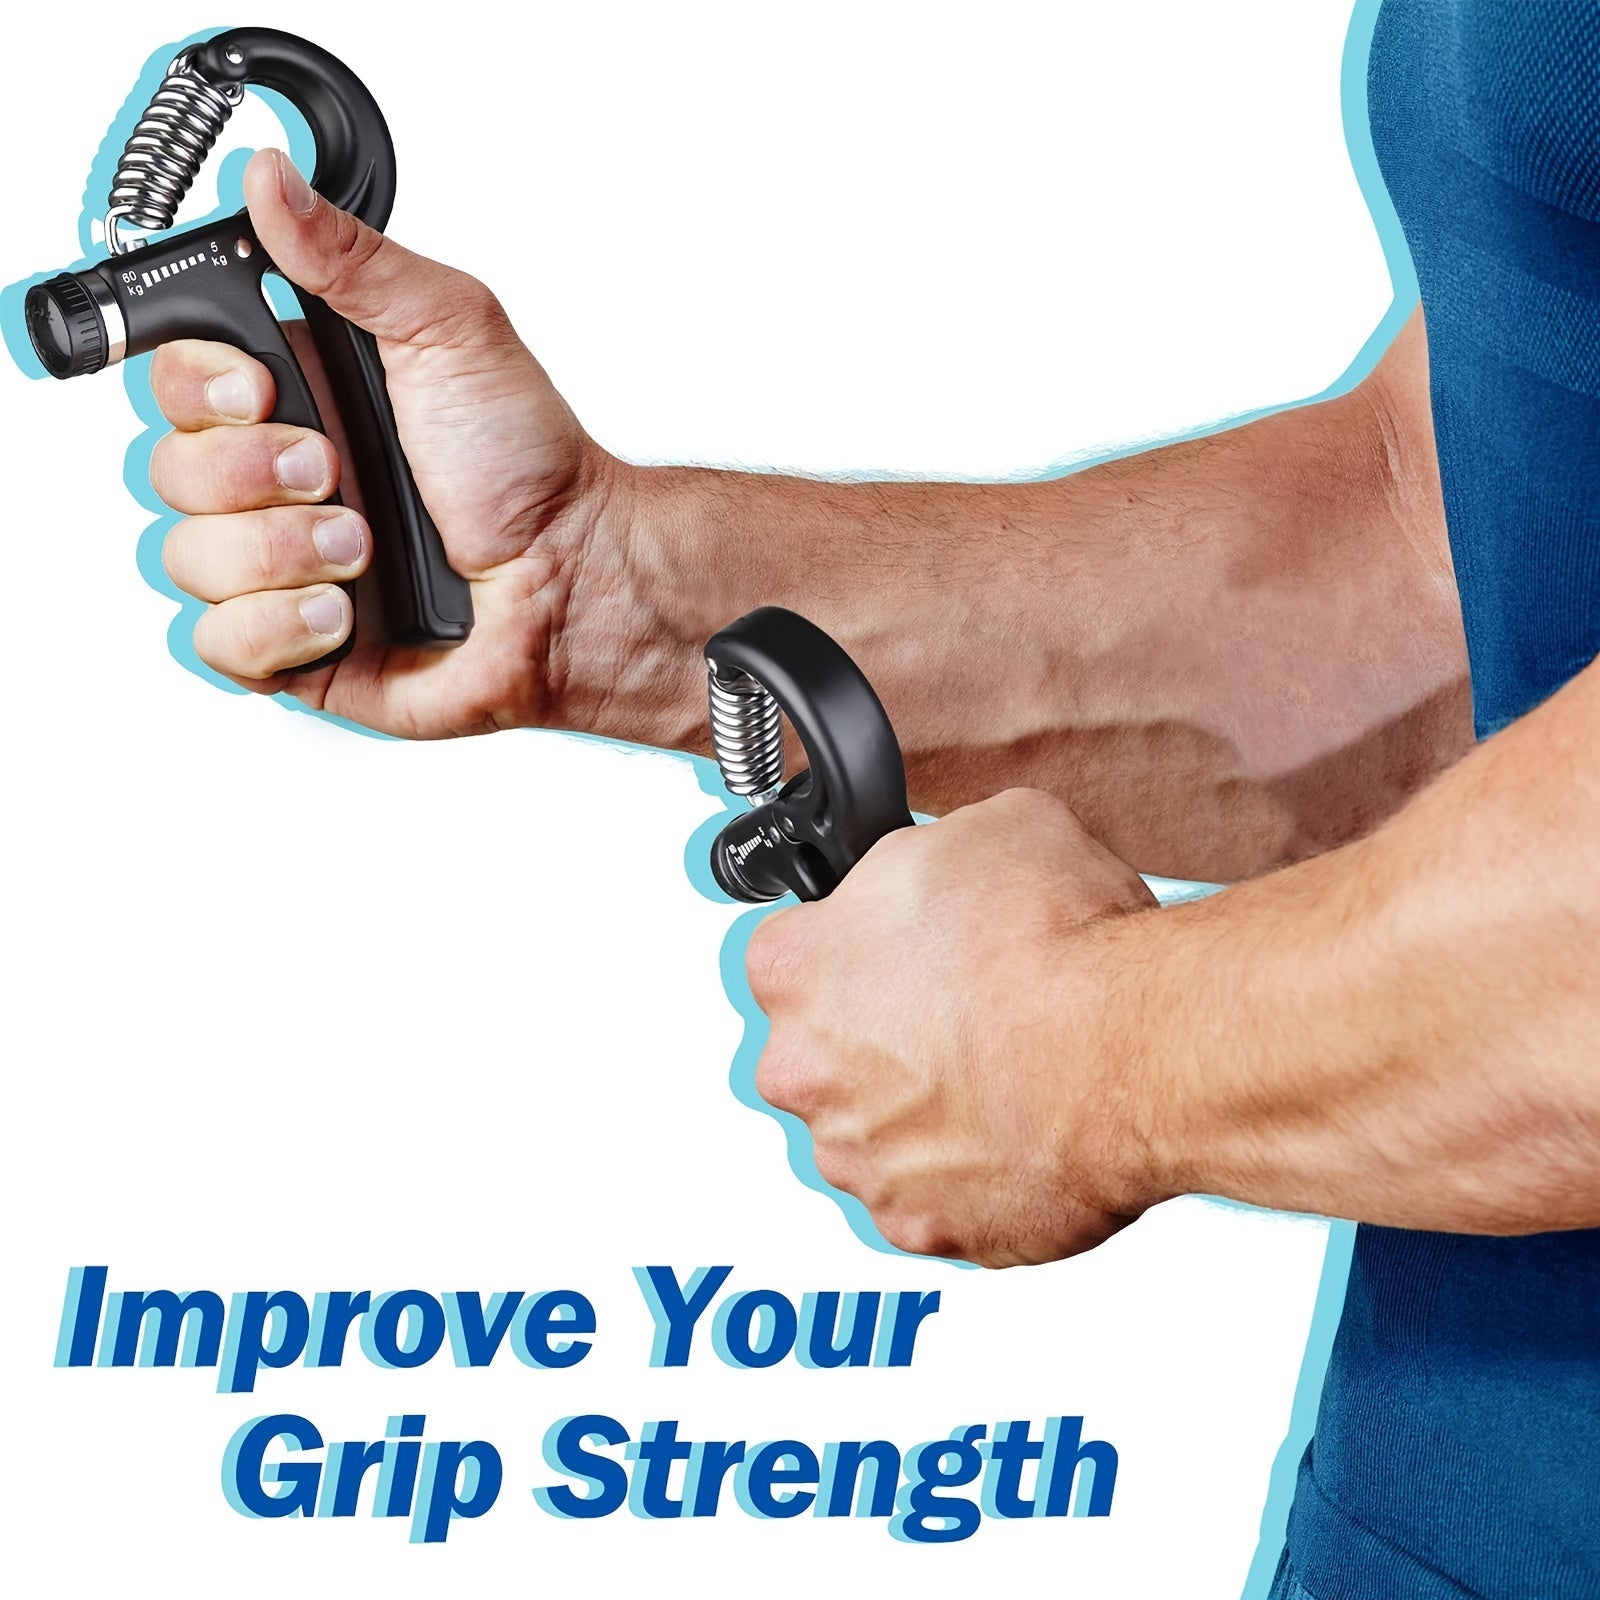 1pc/5pcs Grip Strength Trainer, Hand Grip Exerciser With Adjustable Resistance 11-132 Lbs (5-60kg), Forearm Strengthener, Hand Exerciser For Muscle Building And Injury Recovery